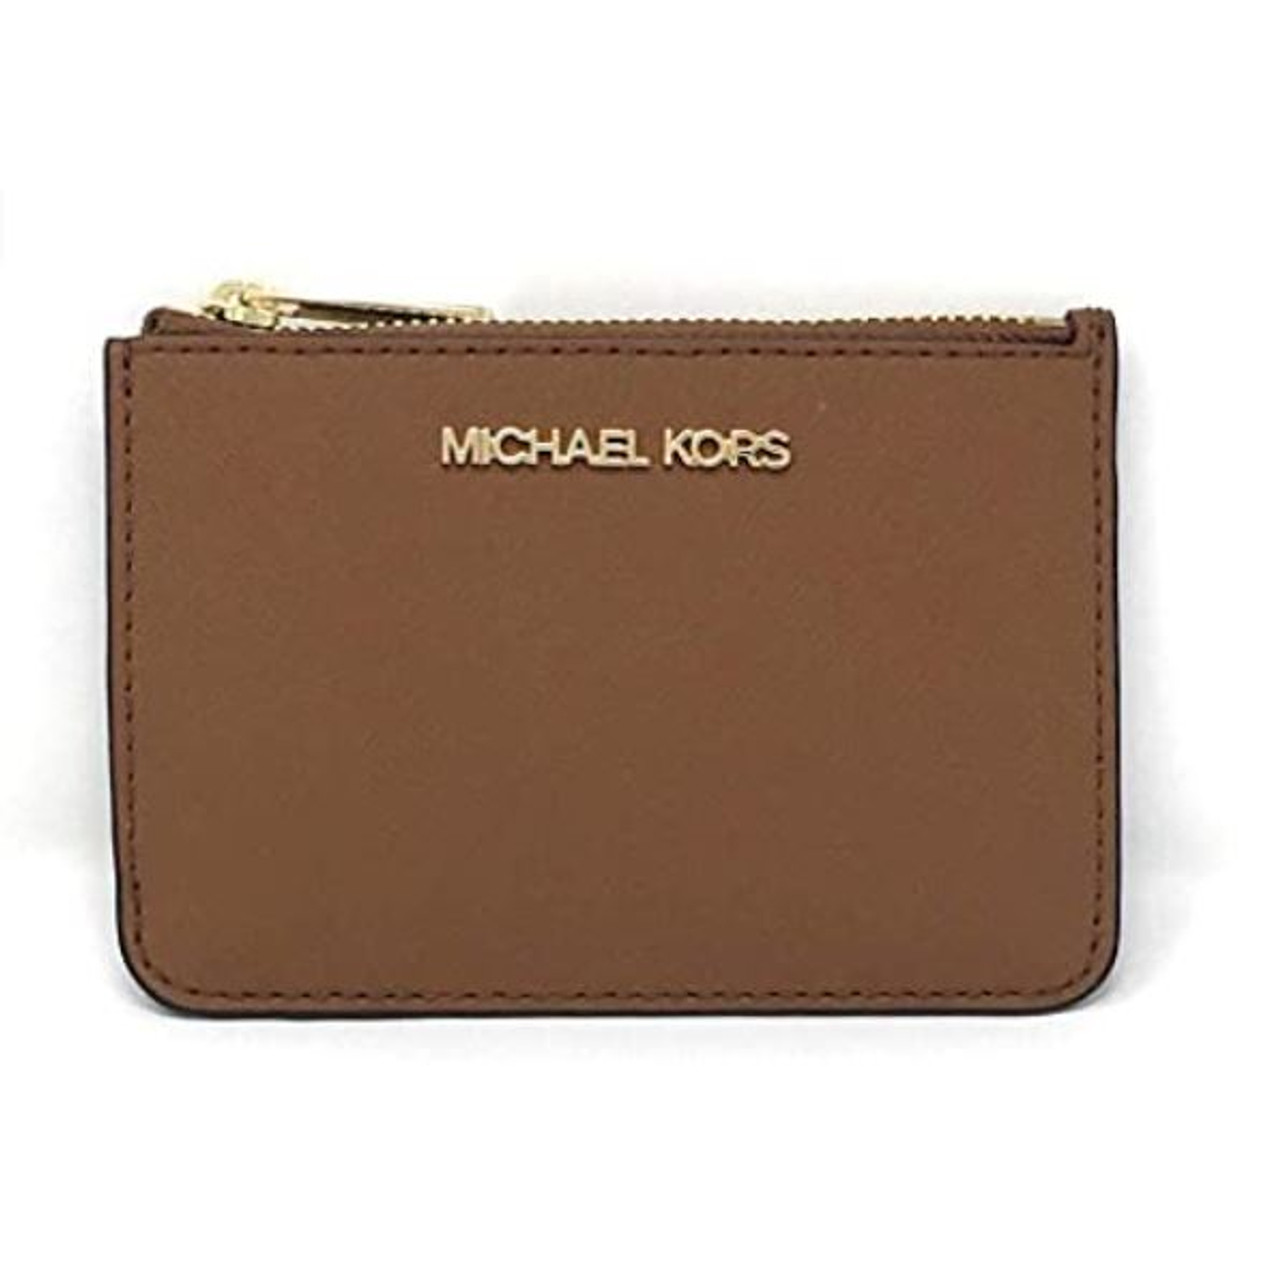 Michael Kors Leather Jet Set Travel Top Zip Card Case Wallet Coin Pouch  Brown